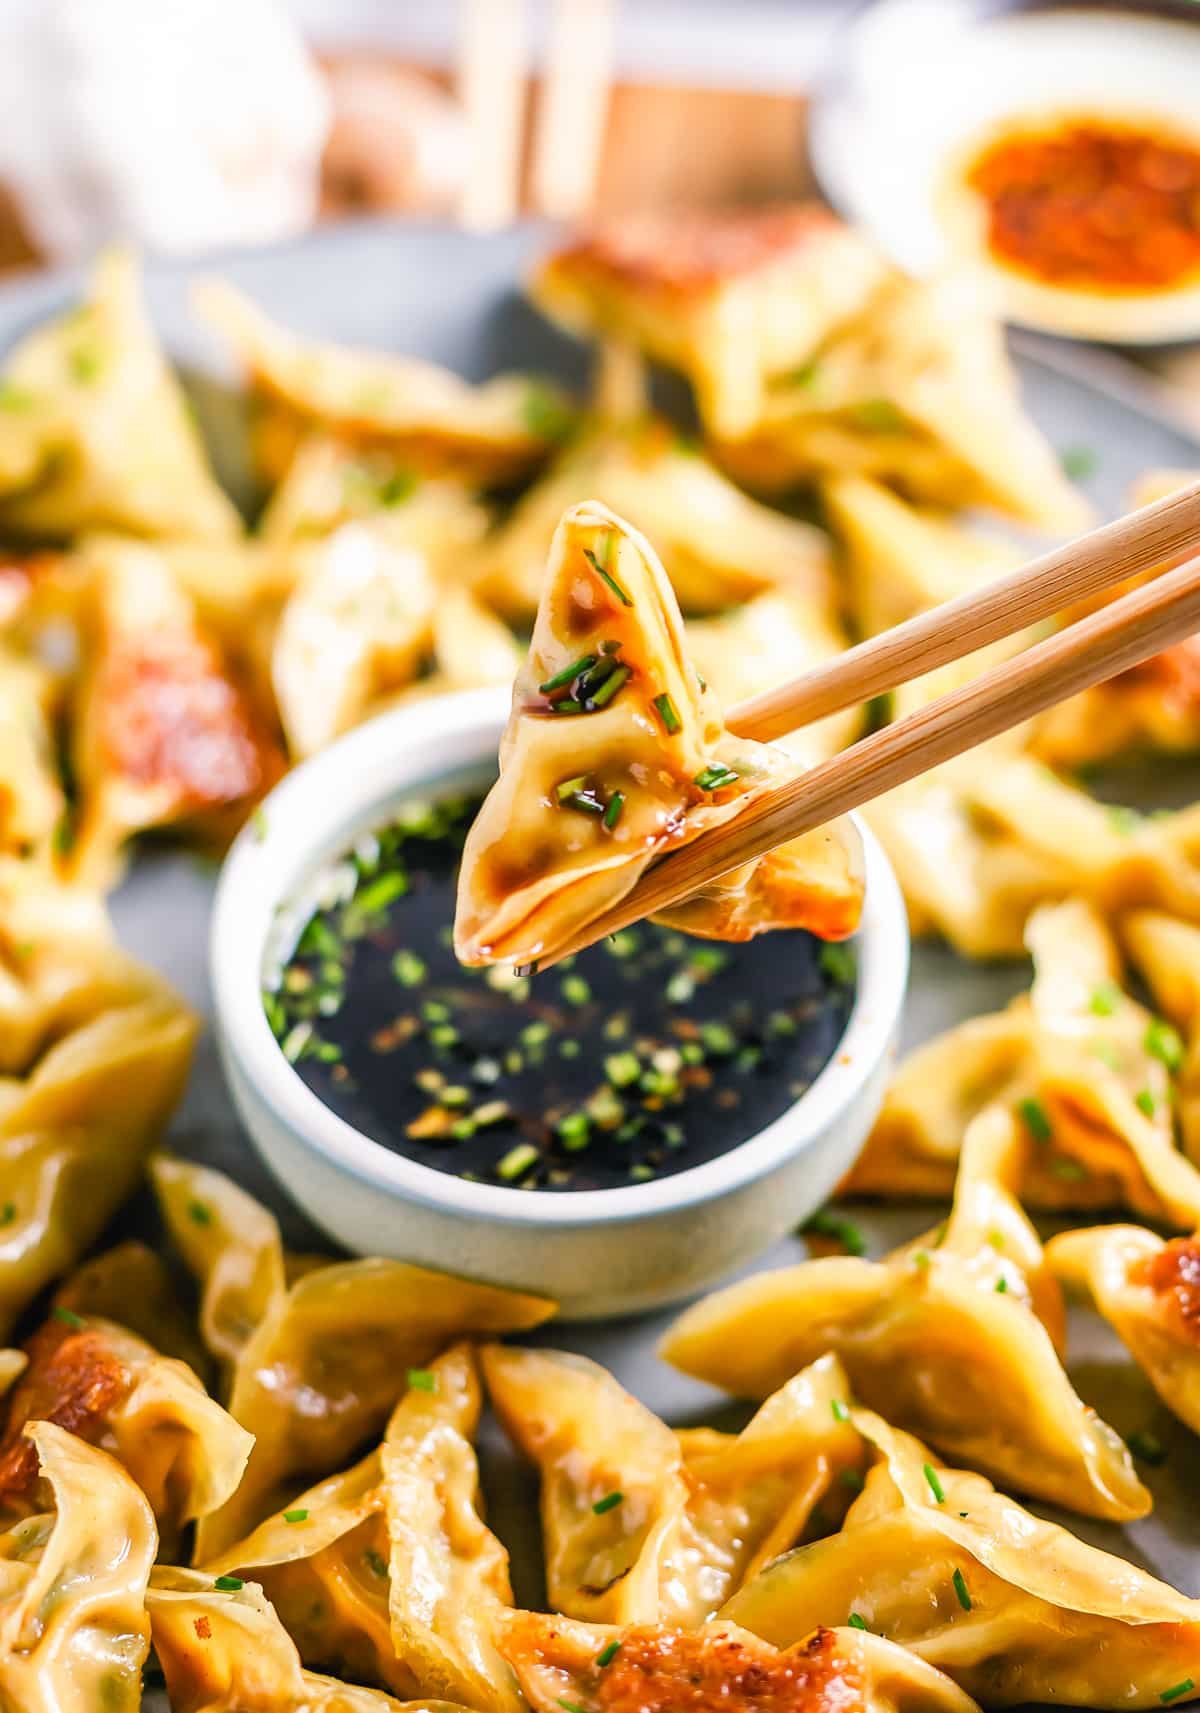 chopsticks holding up pork and chive dumplings that have been dipped in sauce in air